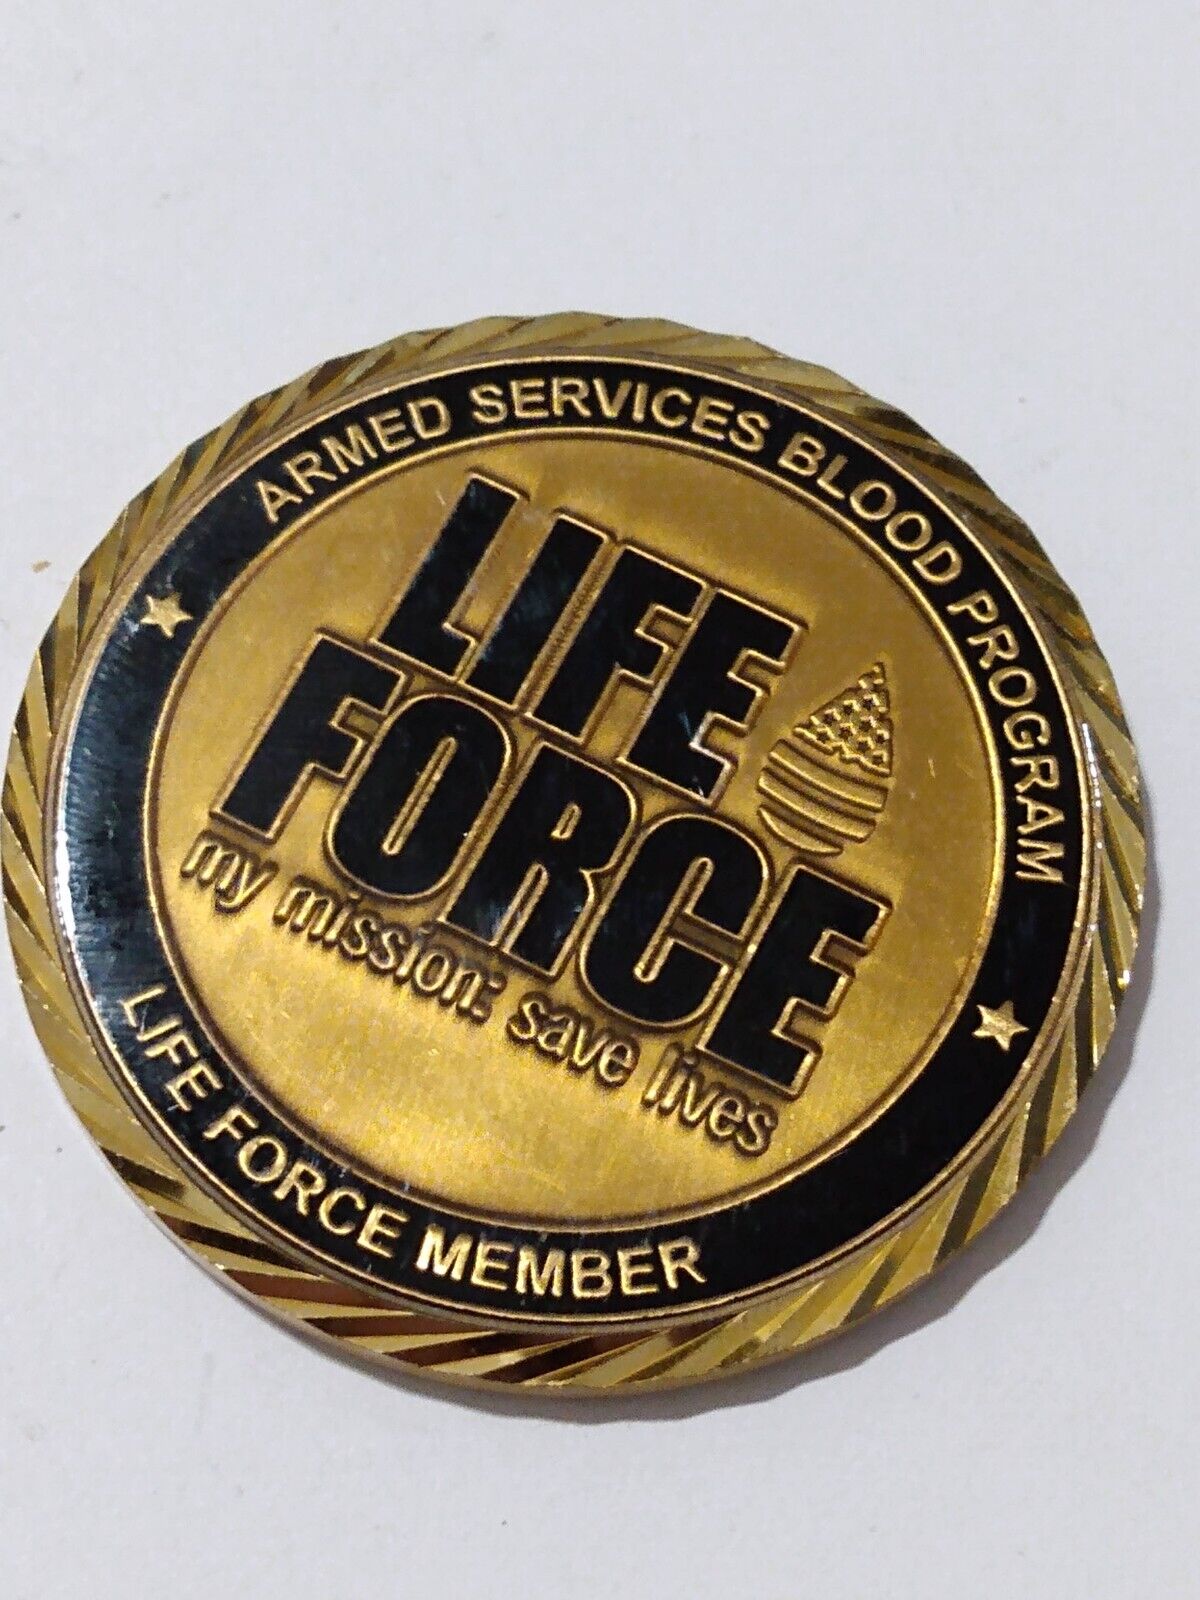 Armed Services Blood Program Life Force Member Challenge Coin